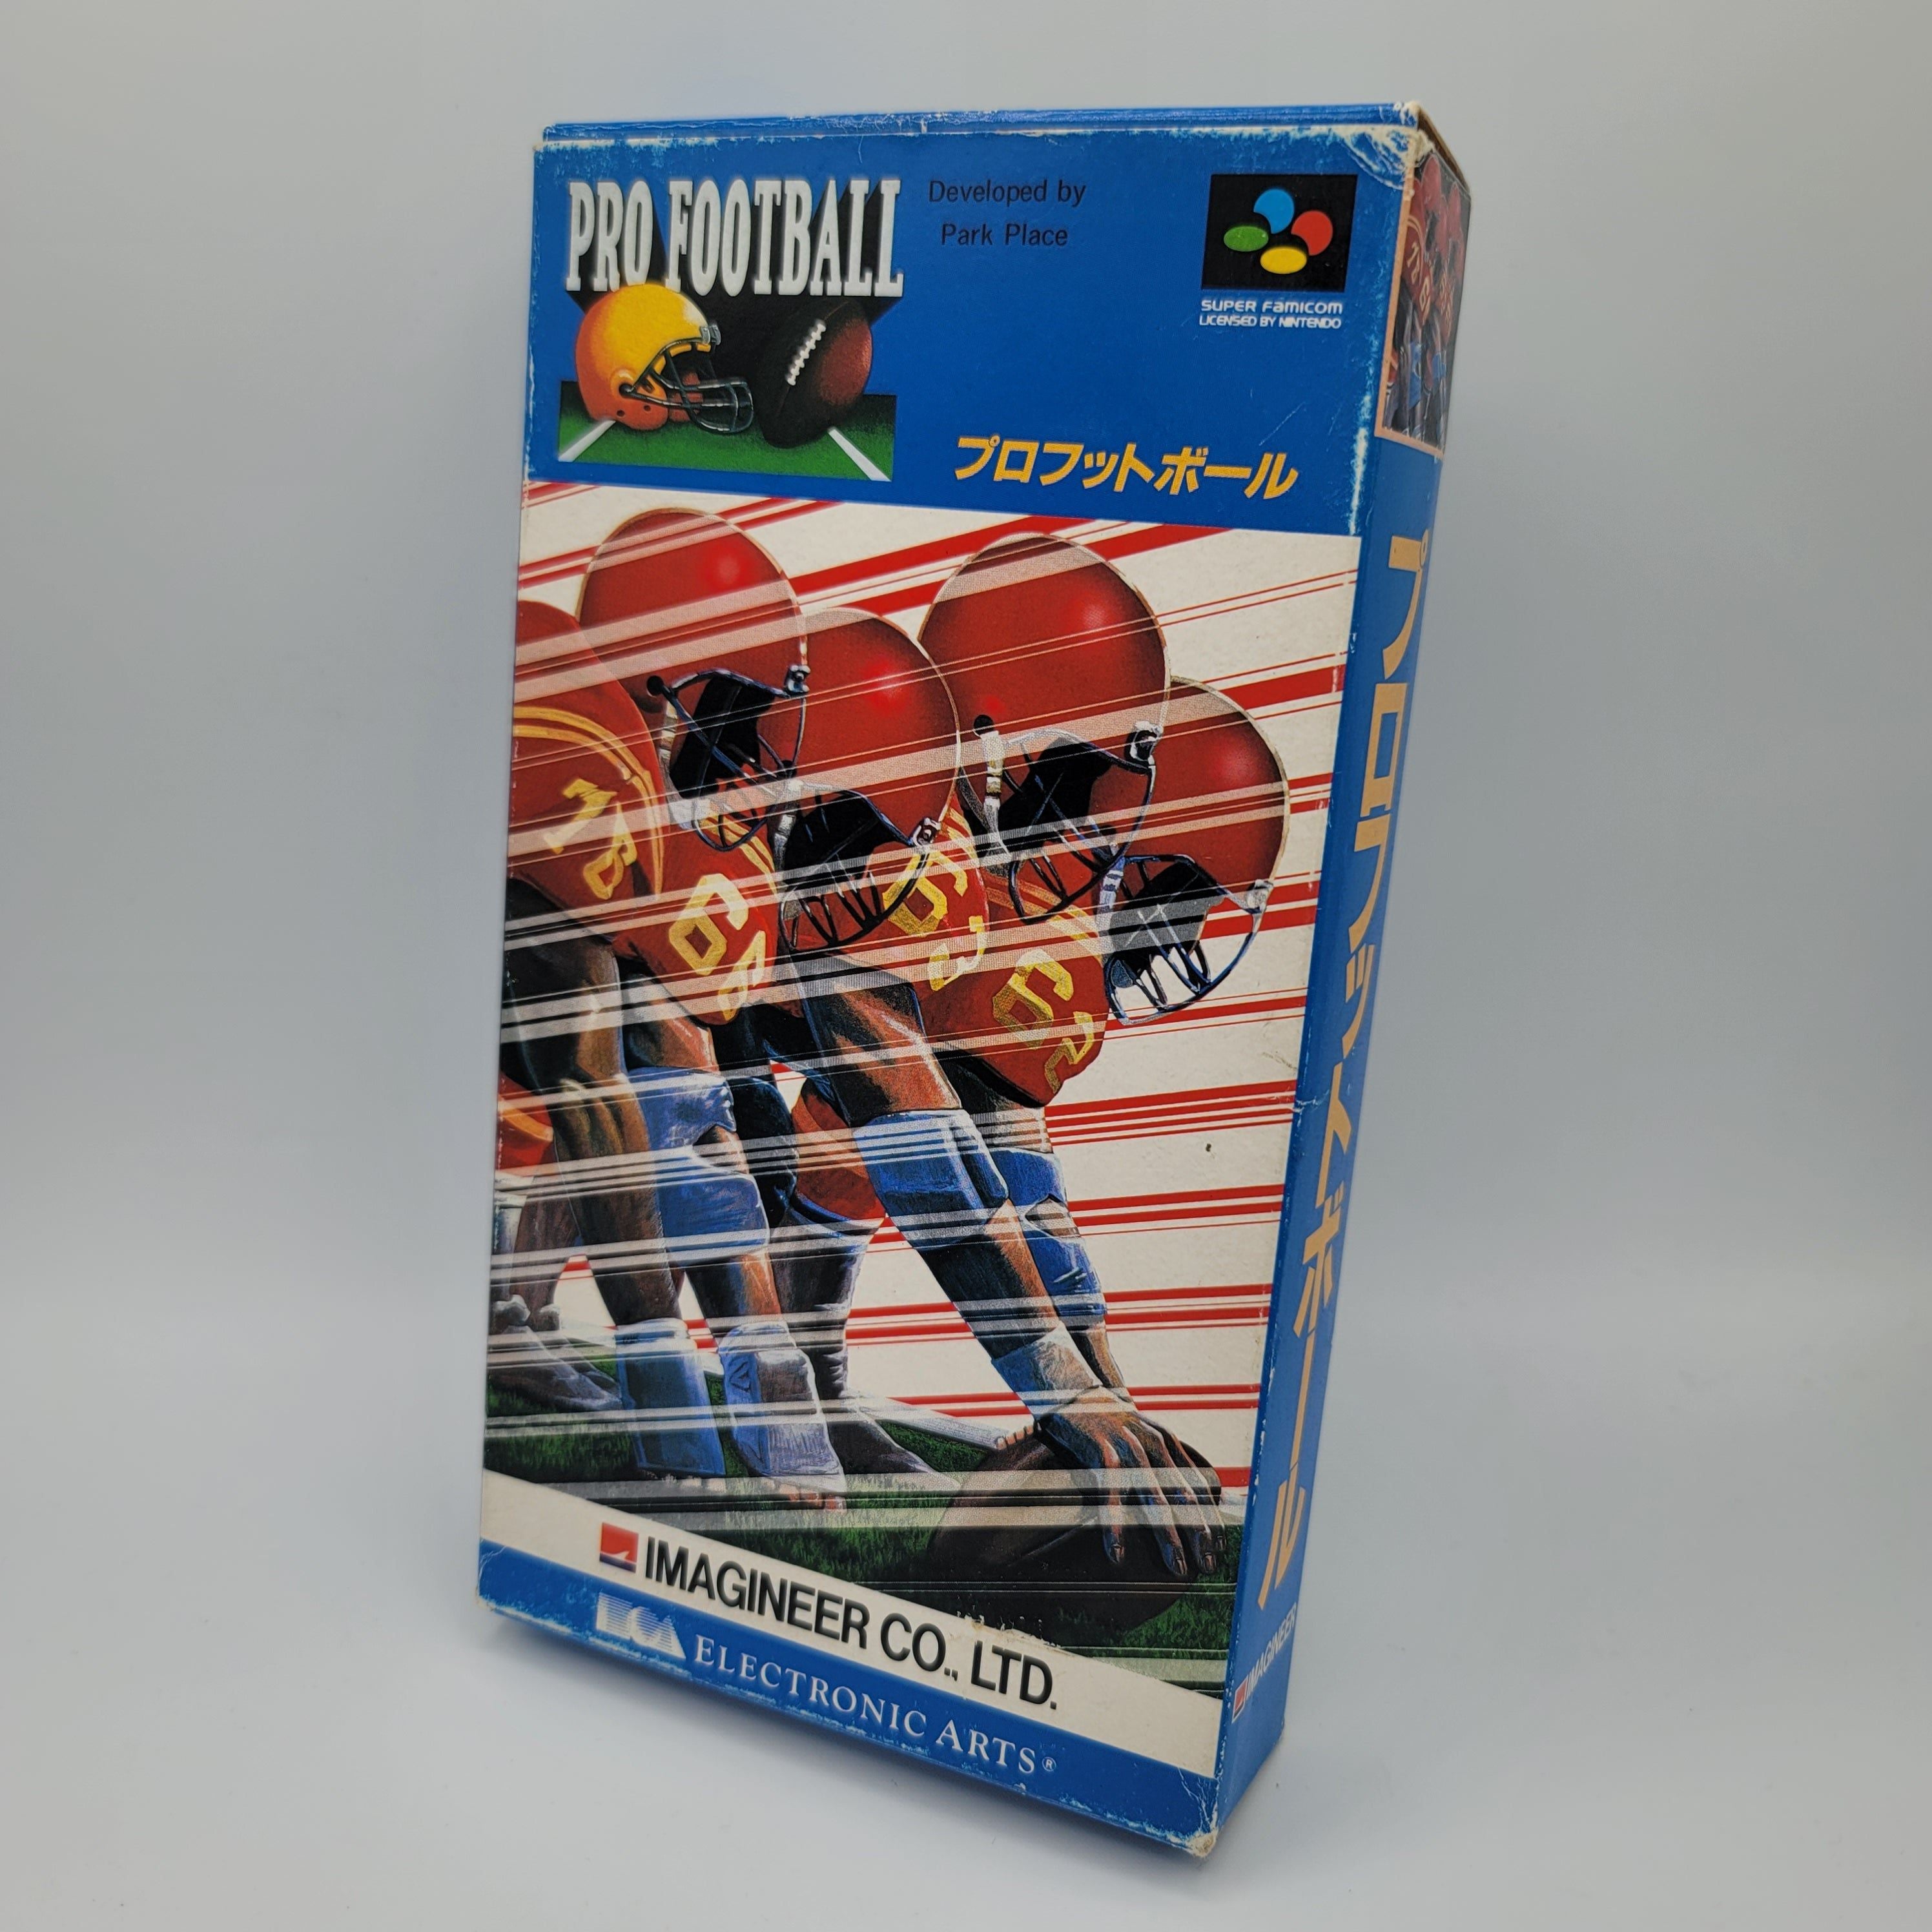 Super Famicom - Pro Football (Complete in Box / With Manual)